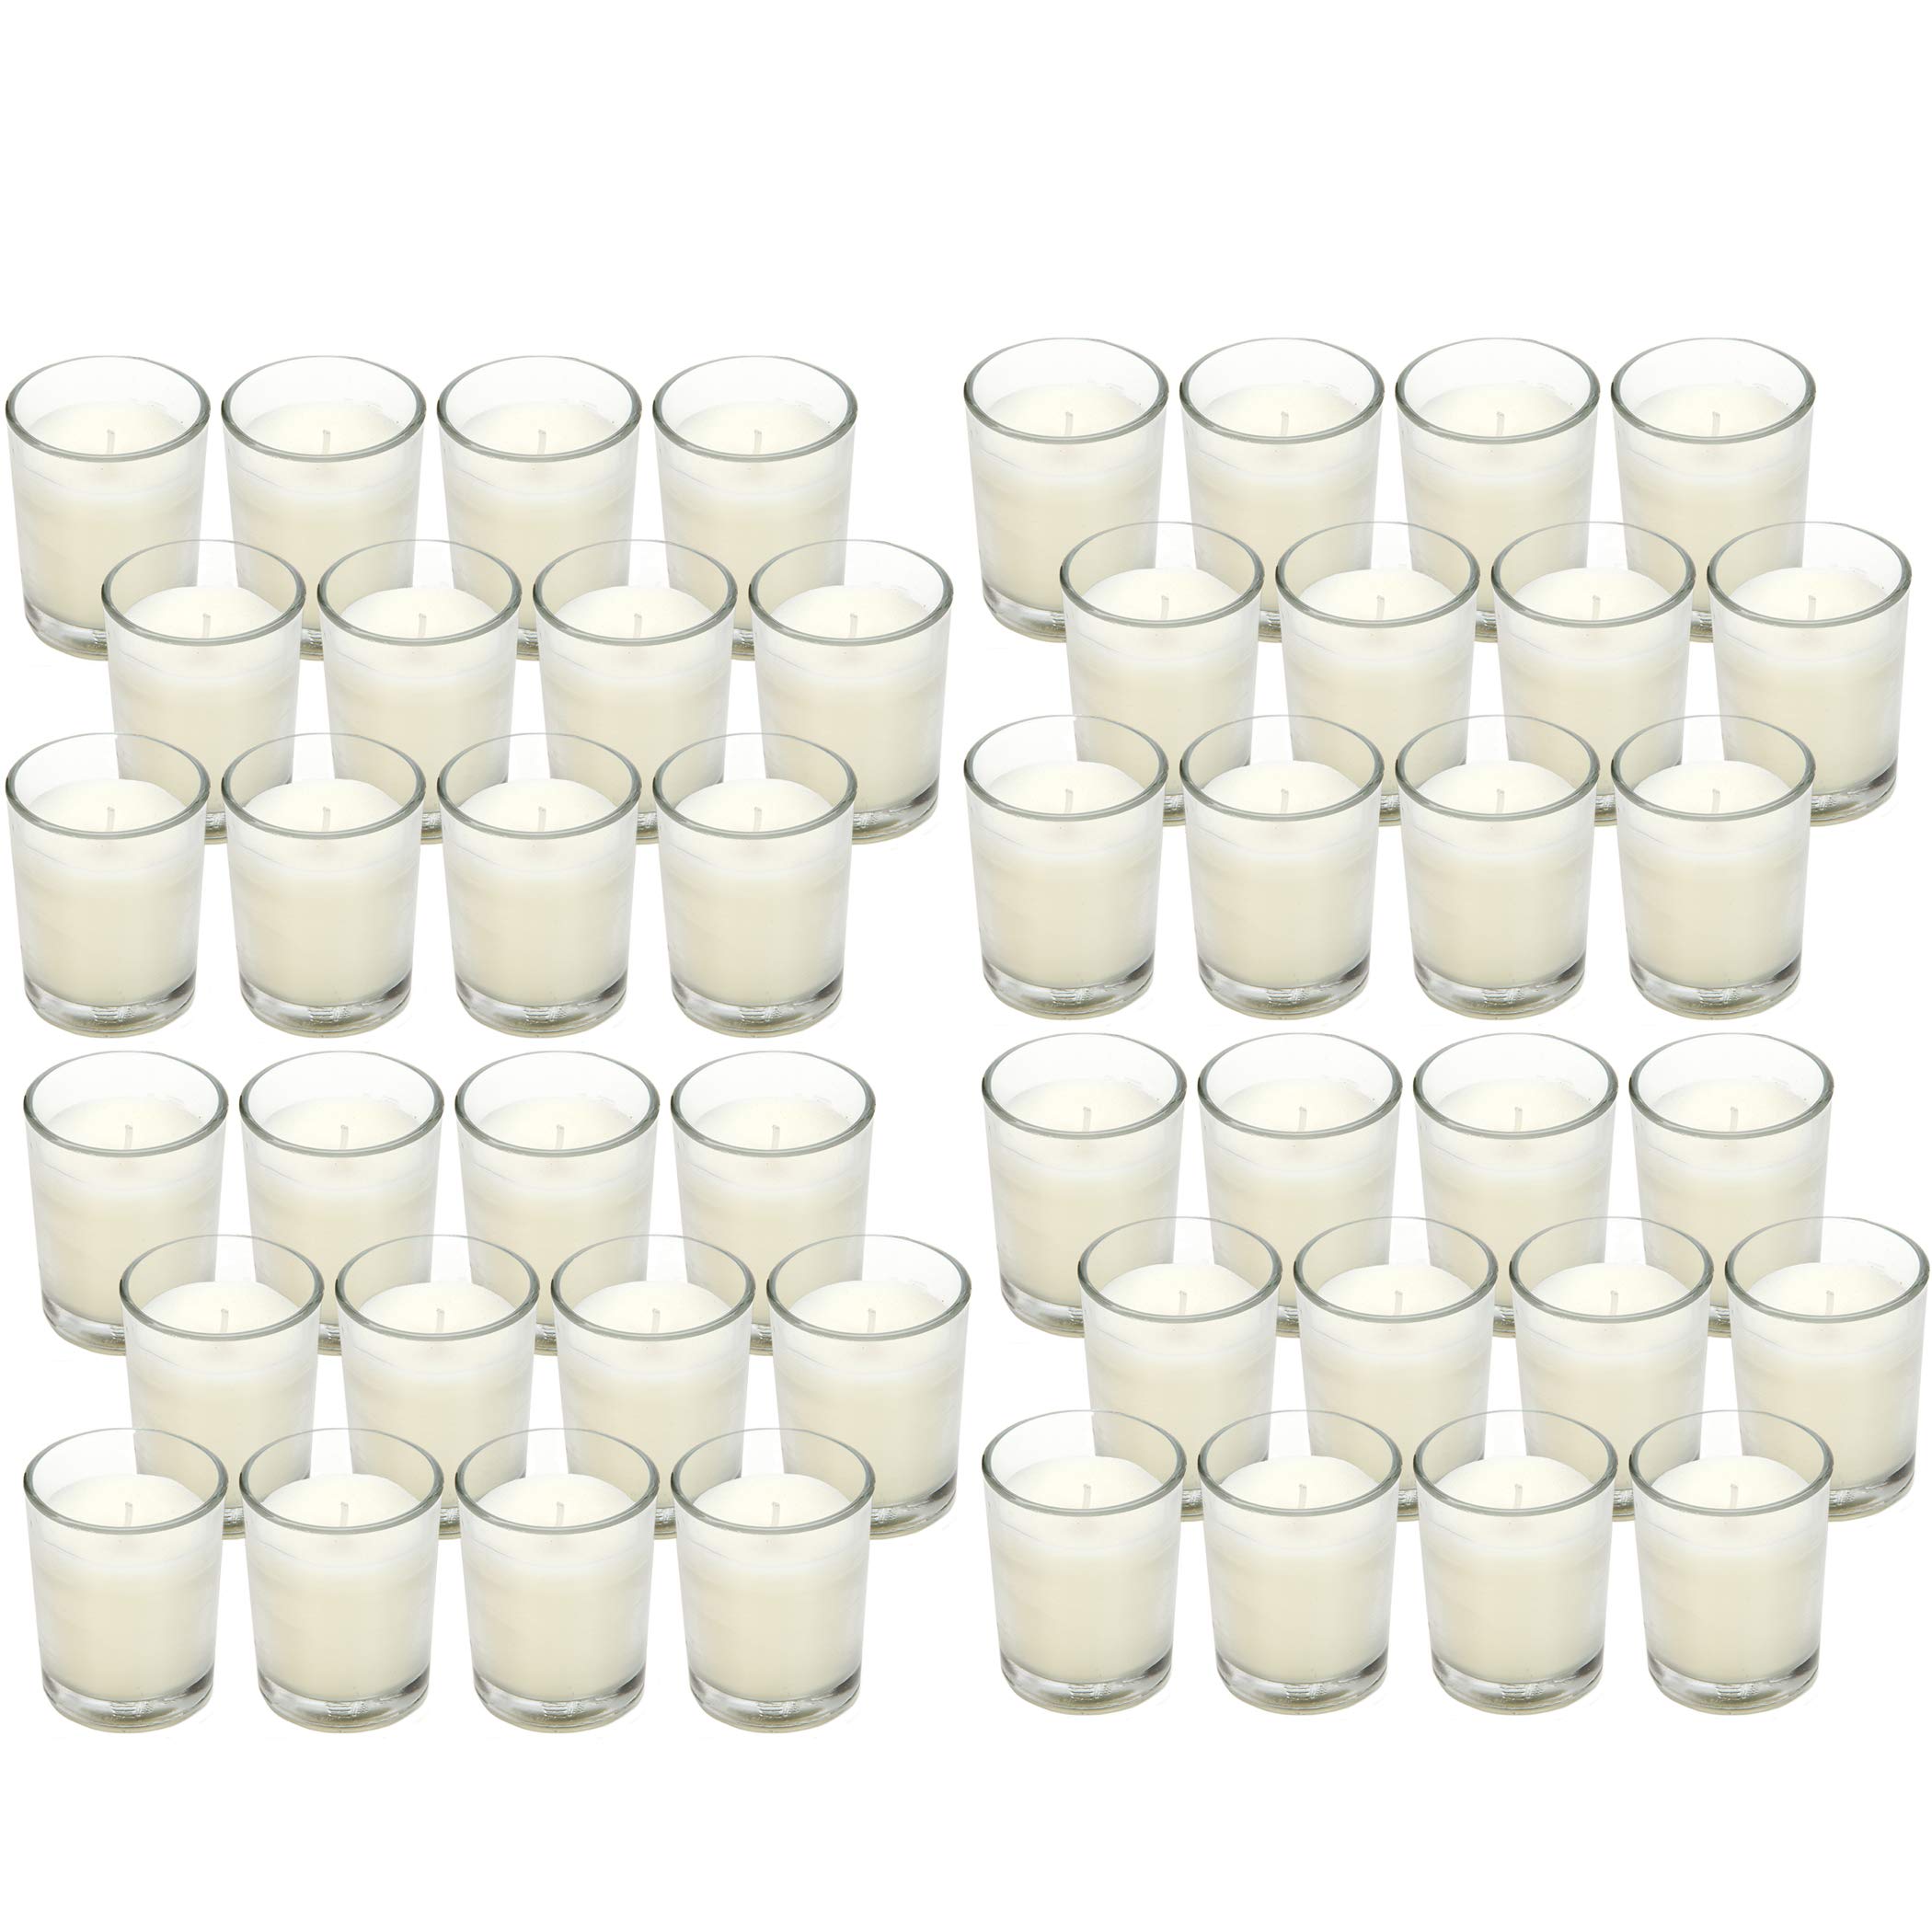 Hosley 48 Pack Ivory Unscented clear glass Filled Votive candles Hand Poured Wax candle Ideal gifts for Aromatherapy Spa Wedding